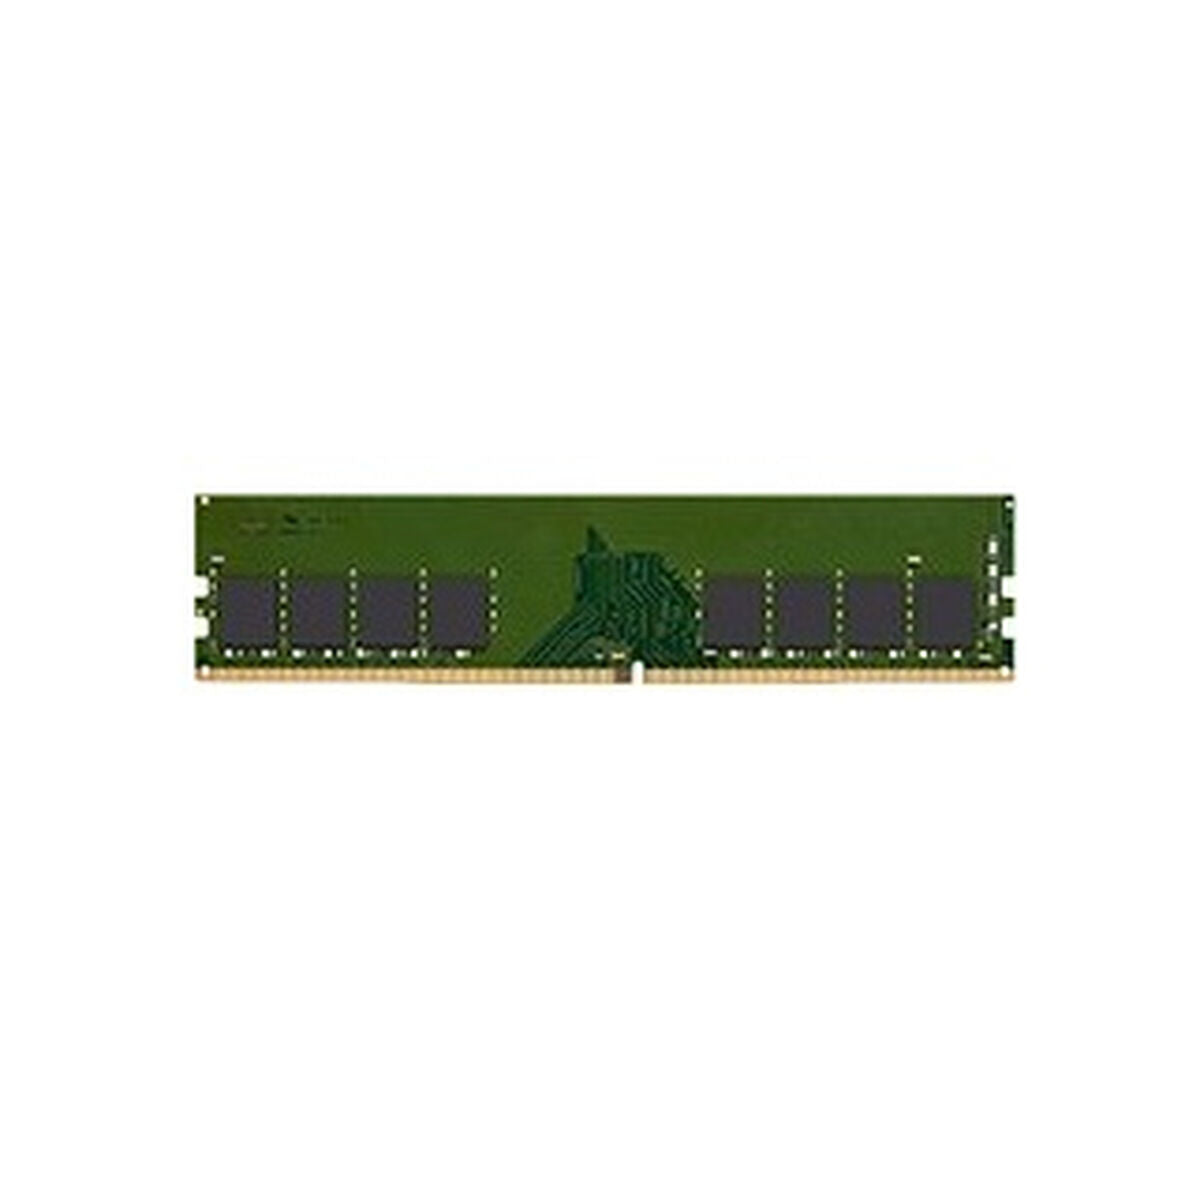 RAM Memory Kingston KCP432NS8/8 8GB DDR4, Kingston, Computing, Components, ram-memory-kingston-kcp432ns8-8-8gb-ddr4-1, Brand_Kingston, category-reference-2609, category-reference-2803, category-reference-2807, category-reference-t-19685, category-reference-t-19912, category-reference-t-21360, computers / components, Condition_NEW, Price_20 - 50, Teleworking, RiotNook